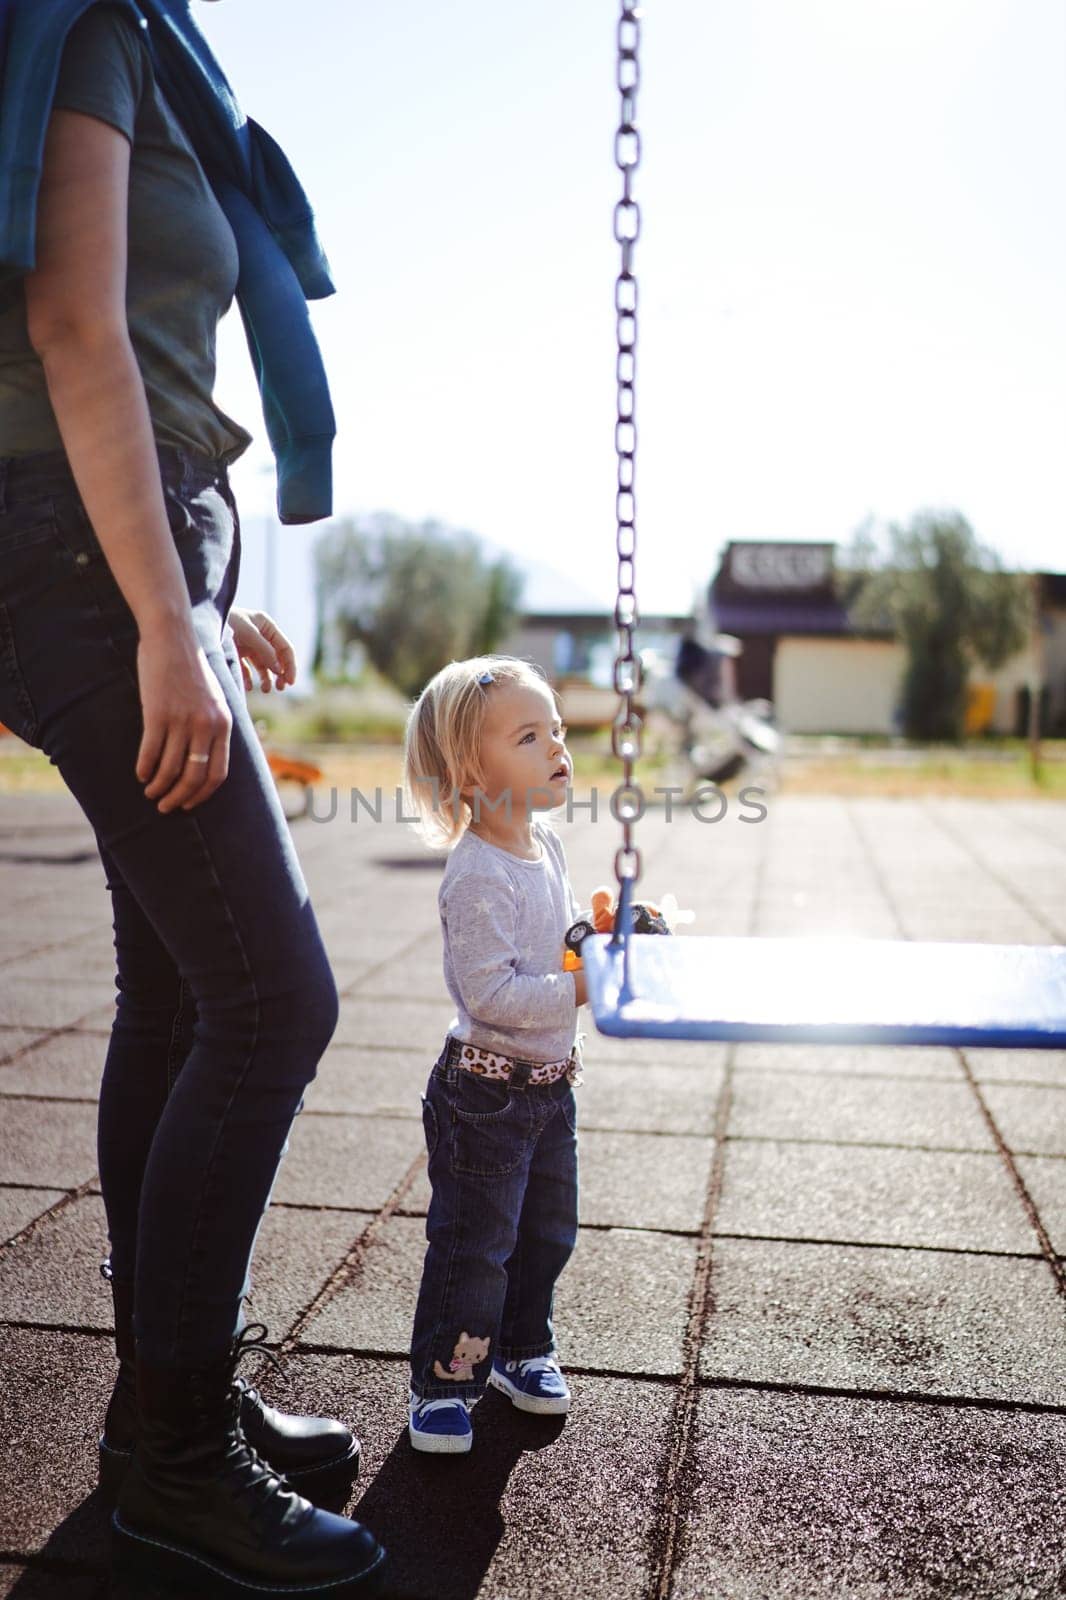 Mom stands near the little girl next to the chain swing on the playground. Cropped. High quality photo